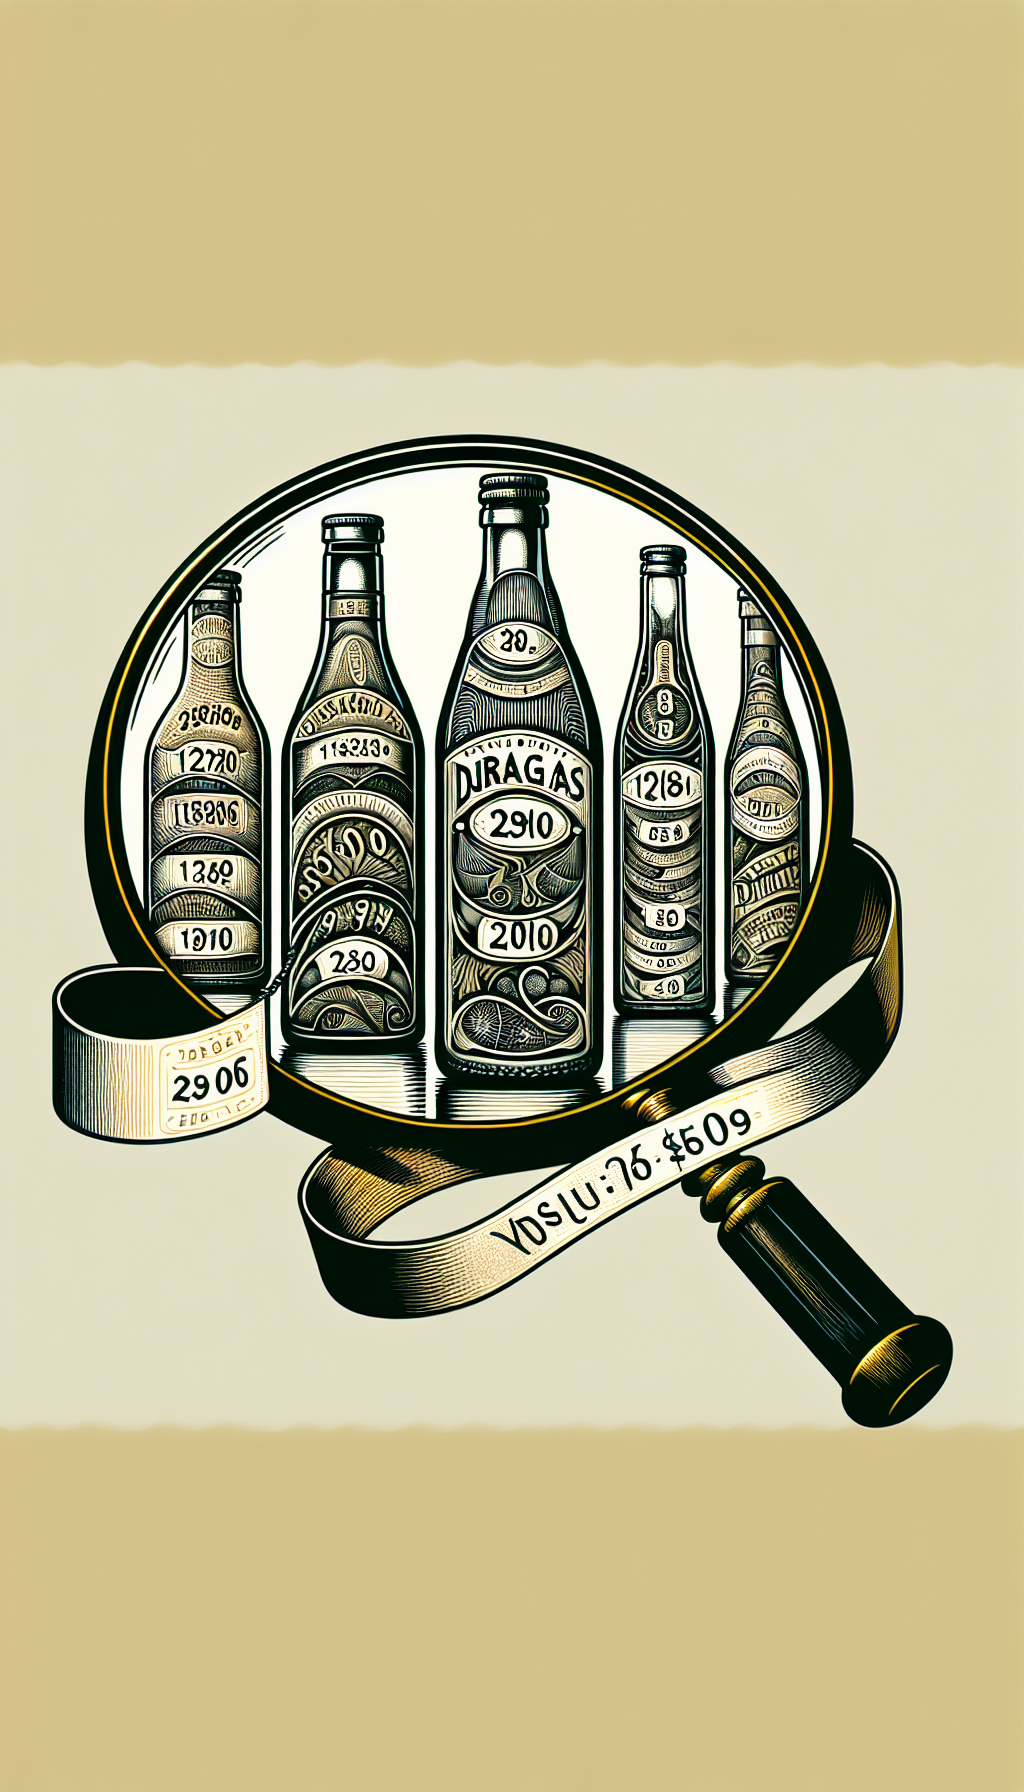 An illustration features a magnifying glass that showcases various sections of a stylized Duraglas bottle as it morphs through a timeline, with each section etched in distinct dated markings and patterns. A scrolling price tag ribbon intertwines with the bottle, where age increases the value displayed in vintage-style numbers, visually marrying the aspects of identification, dating, and antique worth.